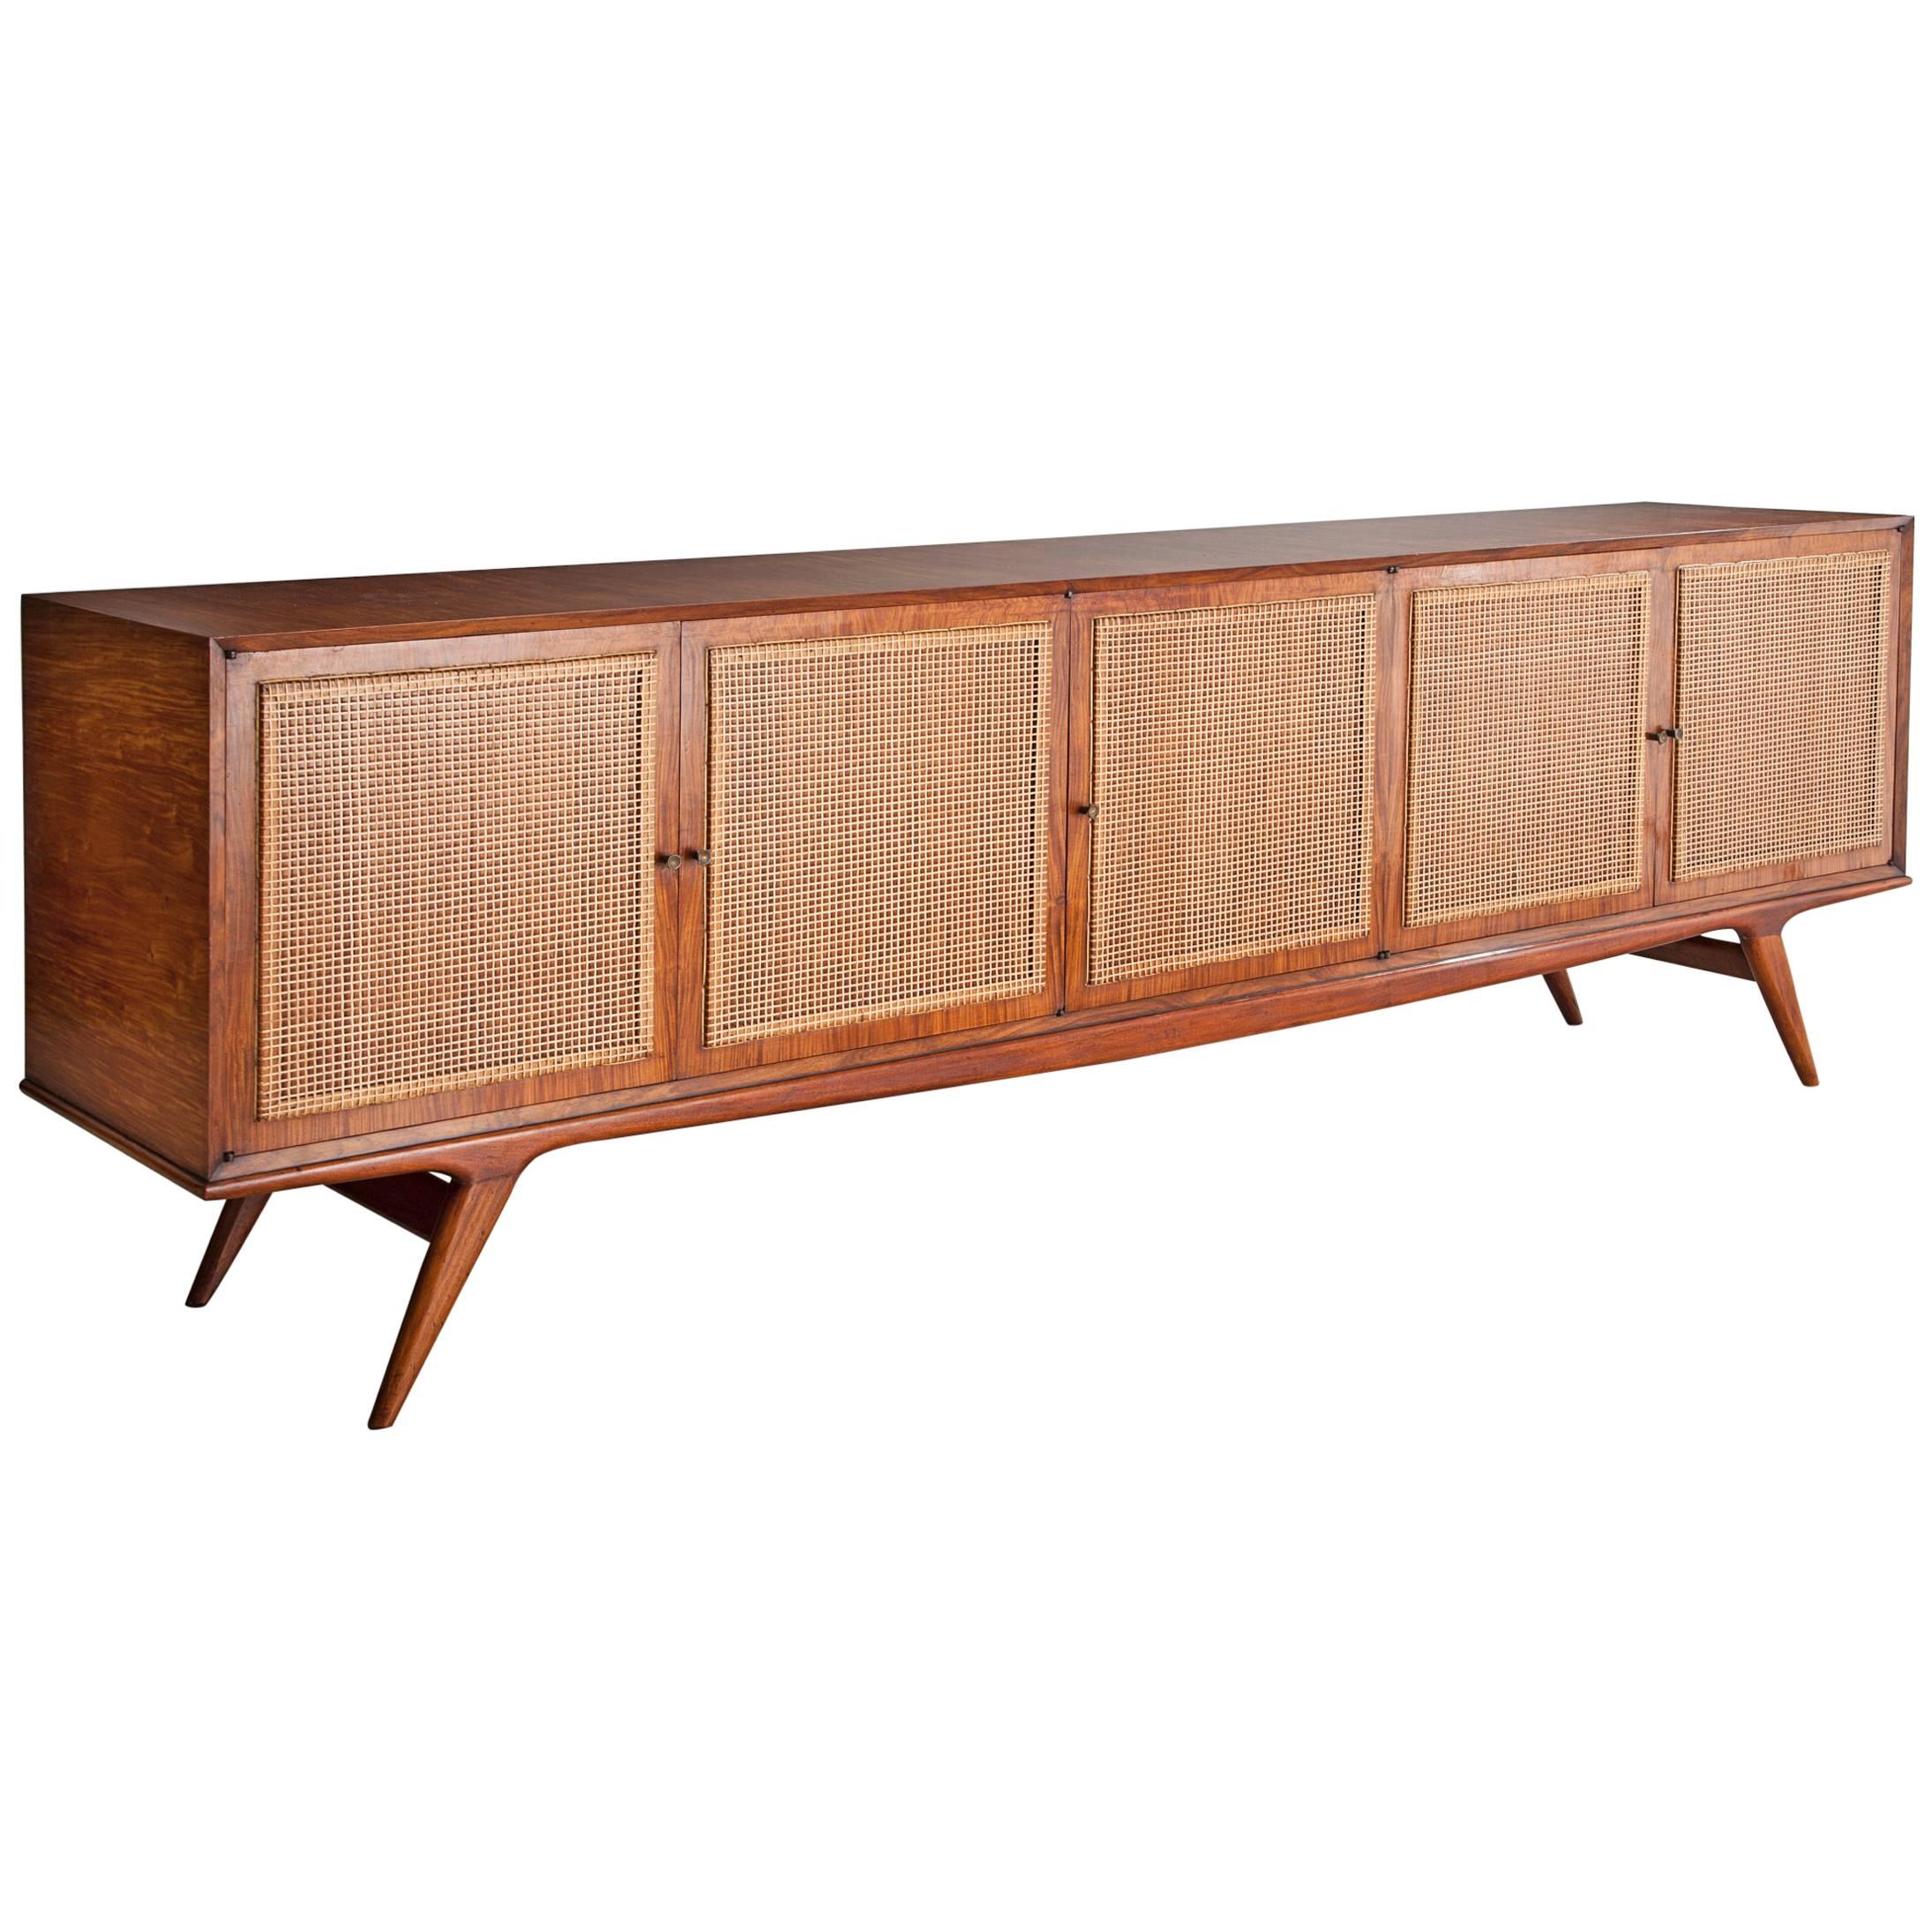 Credenza in Caviona Wood with a Cane Front by Martin Eisler, Brazil, 1950s